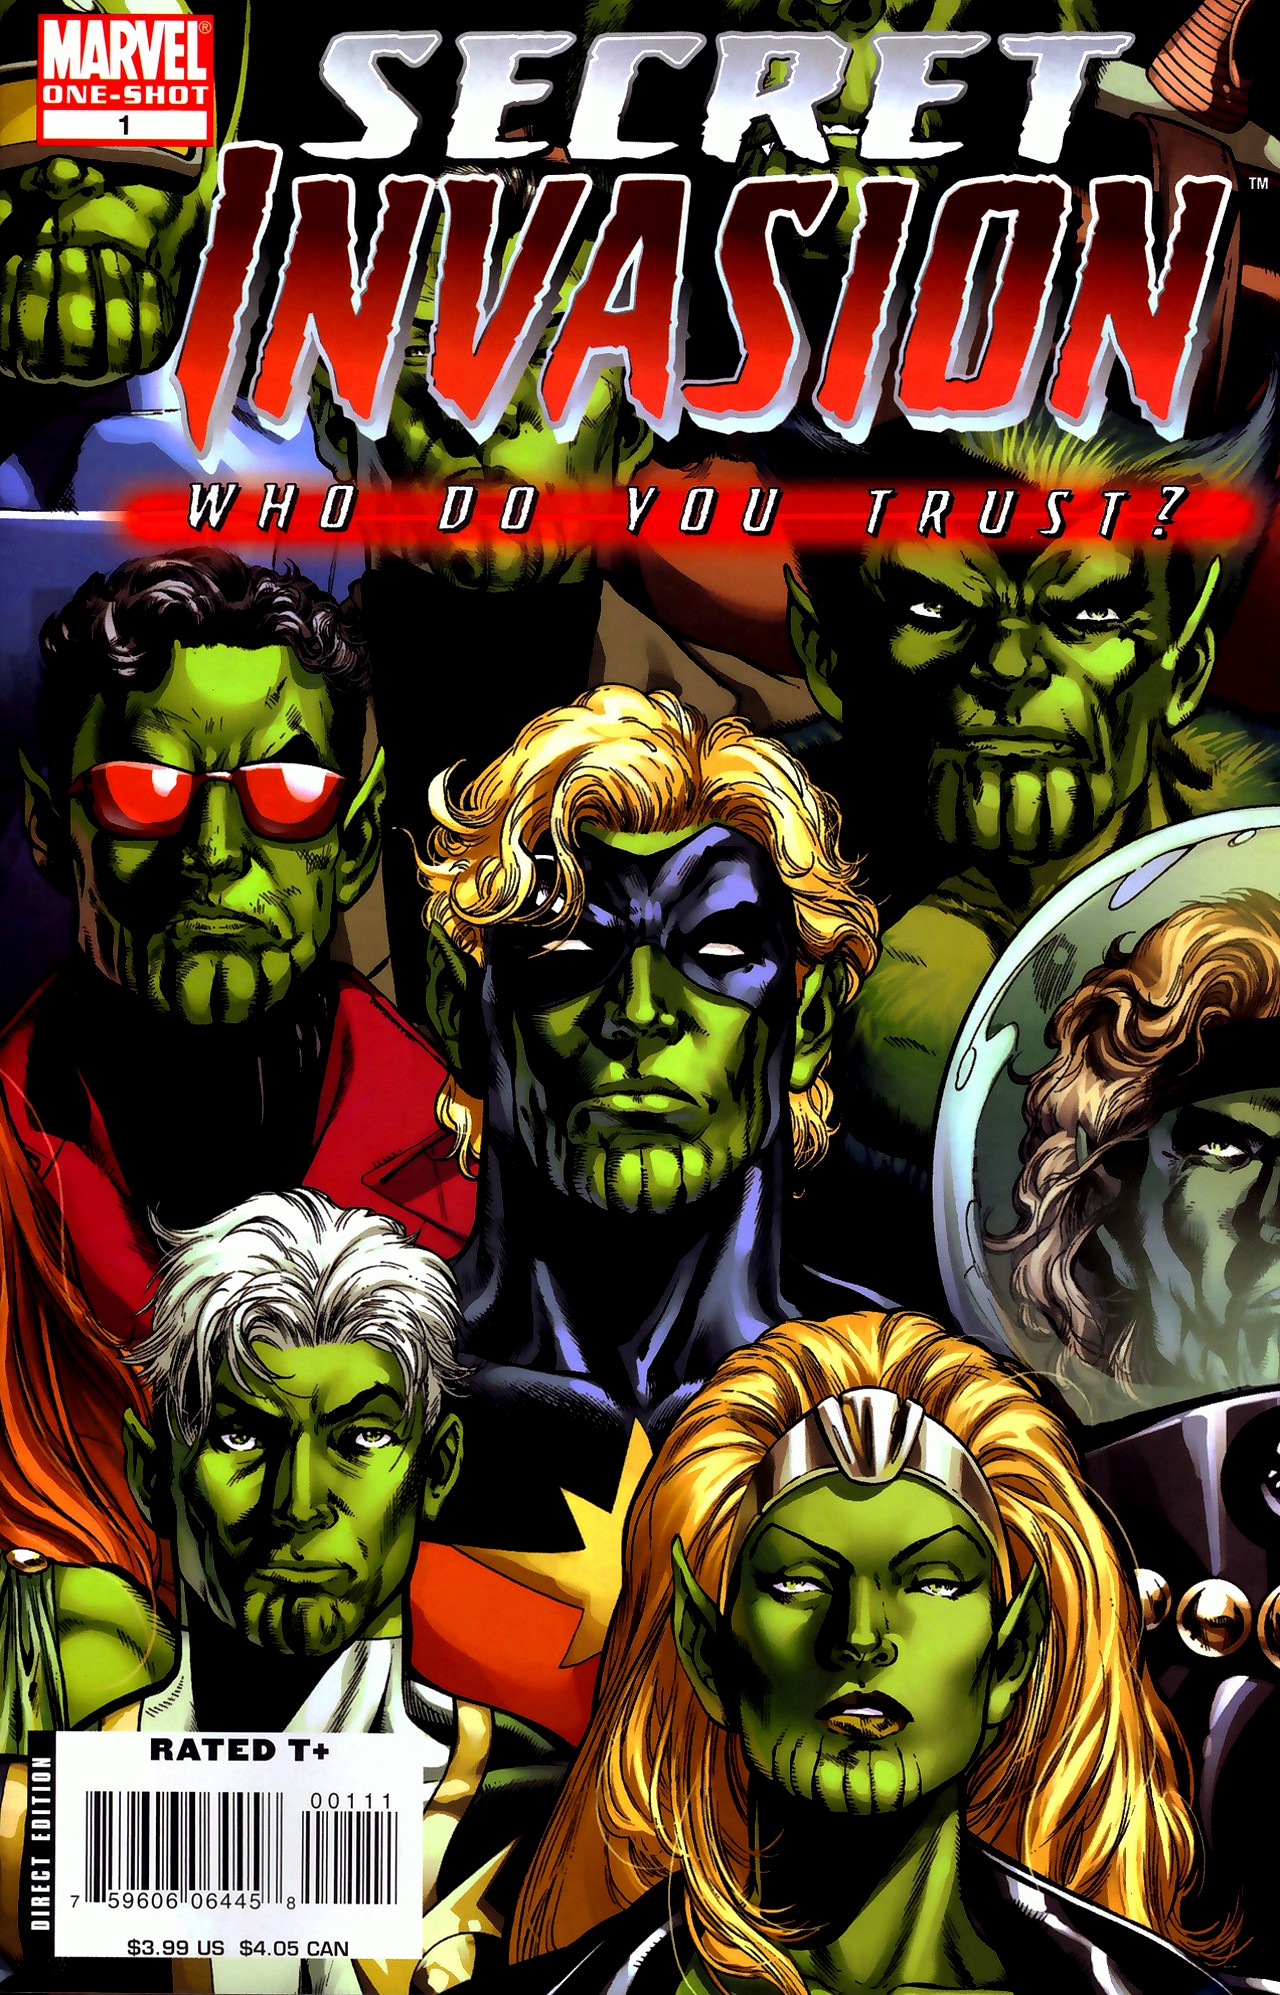 Read online Secret Invasion: Who Do You Trust? comic -  Issue # Full - 1